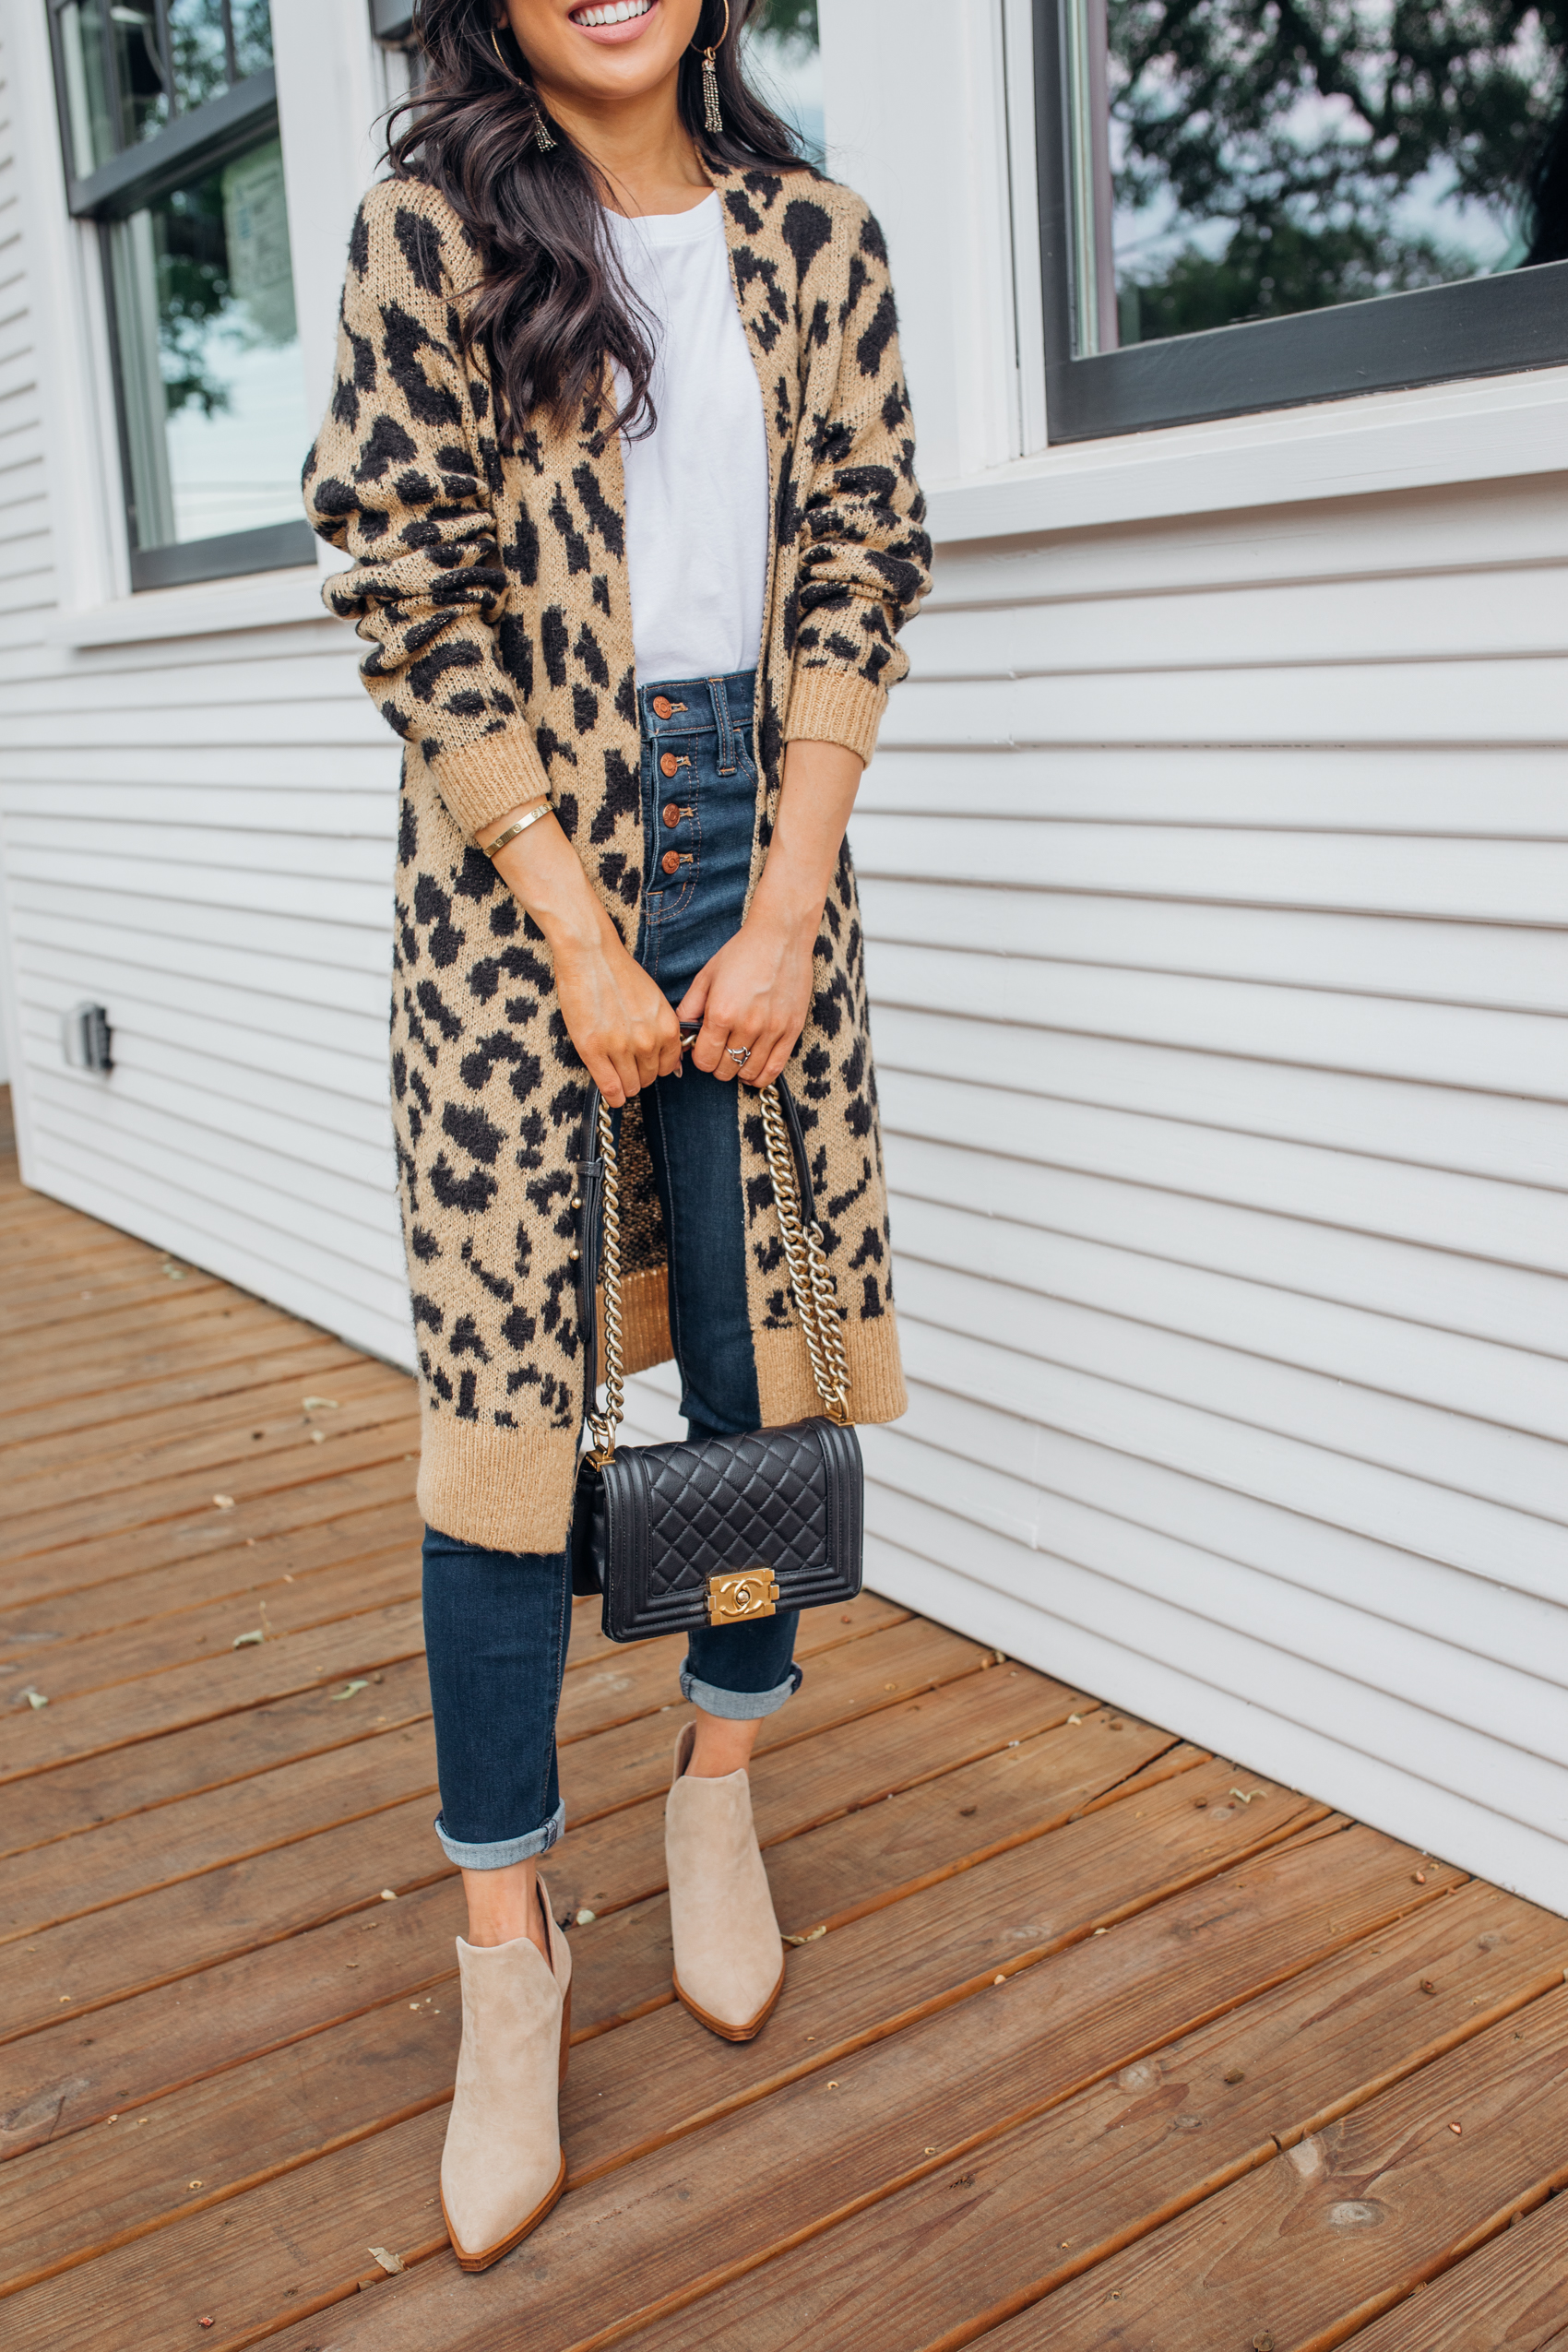 Leopard cardigan outfit inspo for fall with high-waisted jeans